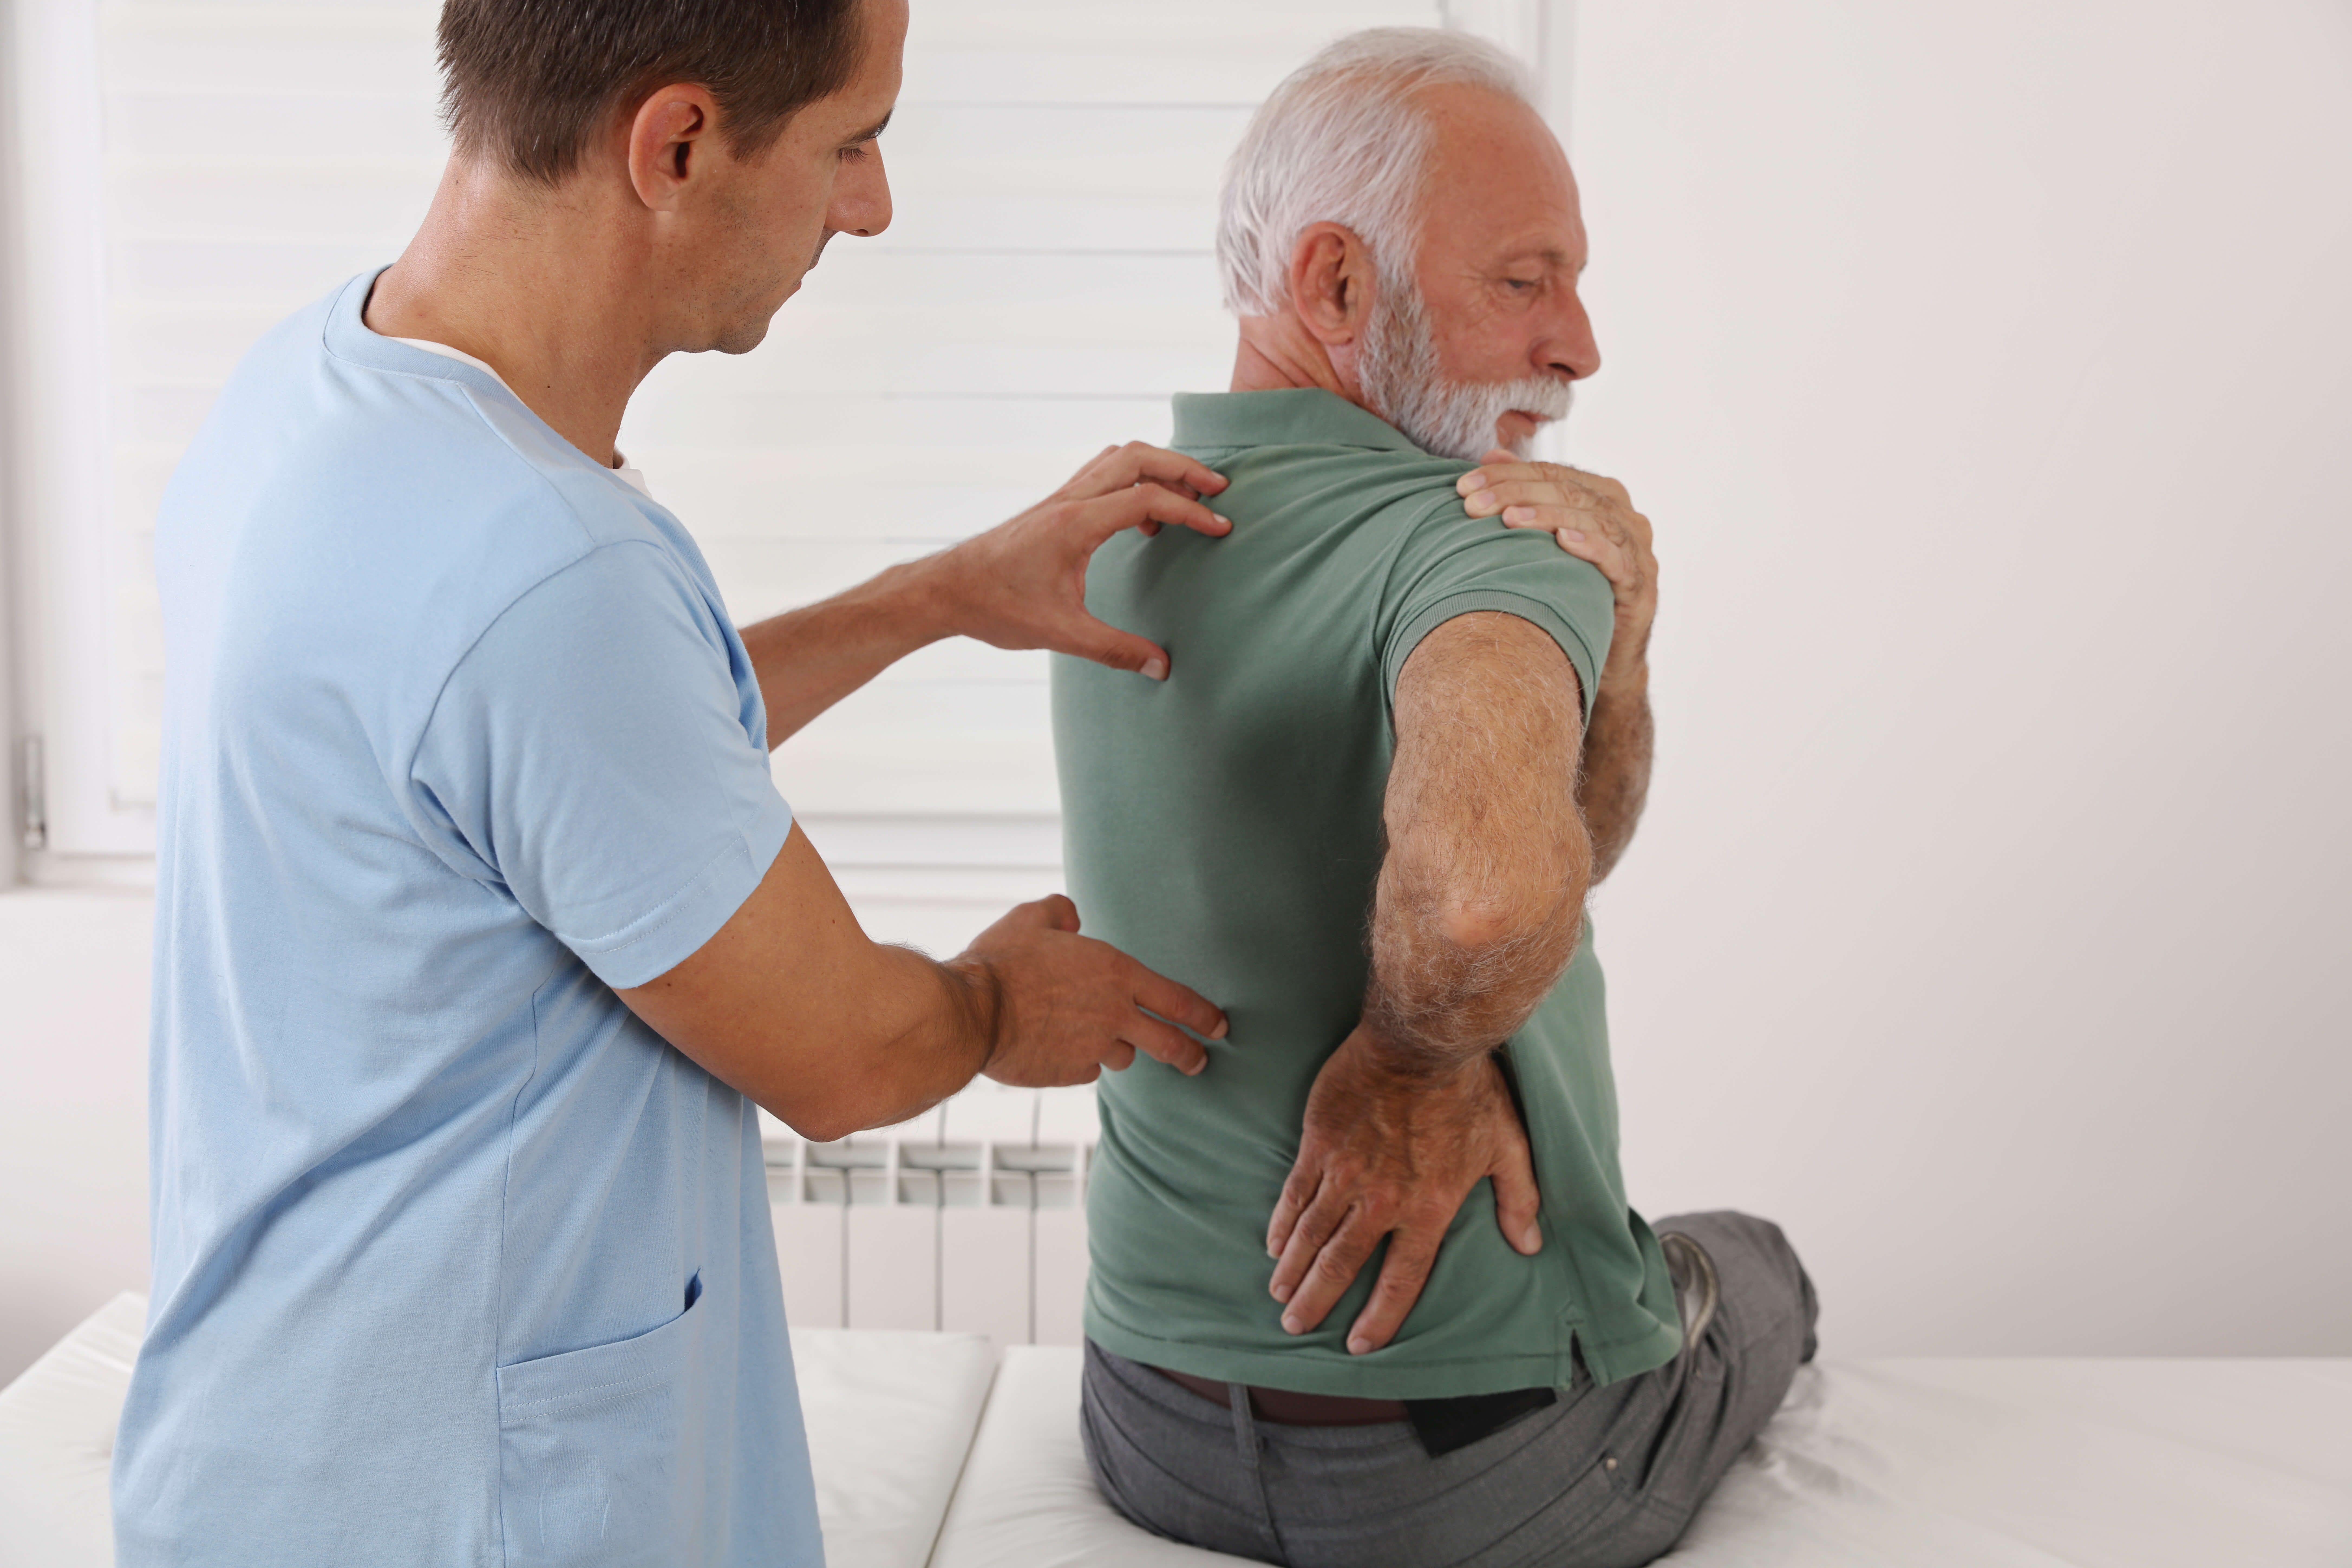 Man with back pain being helped by doctor